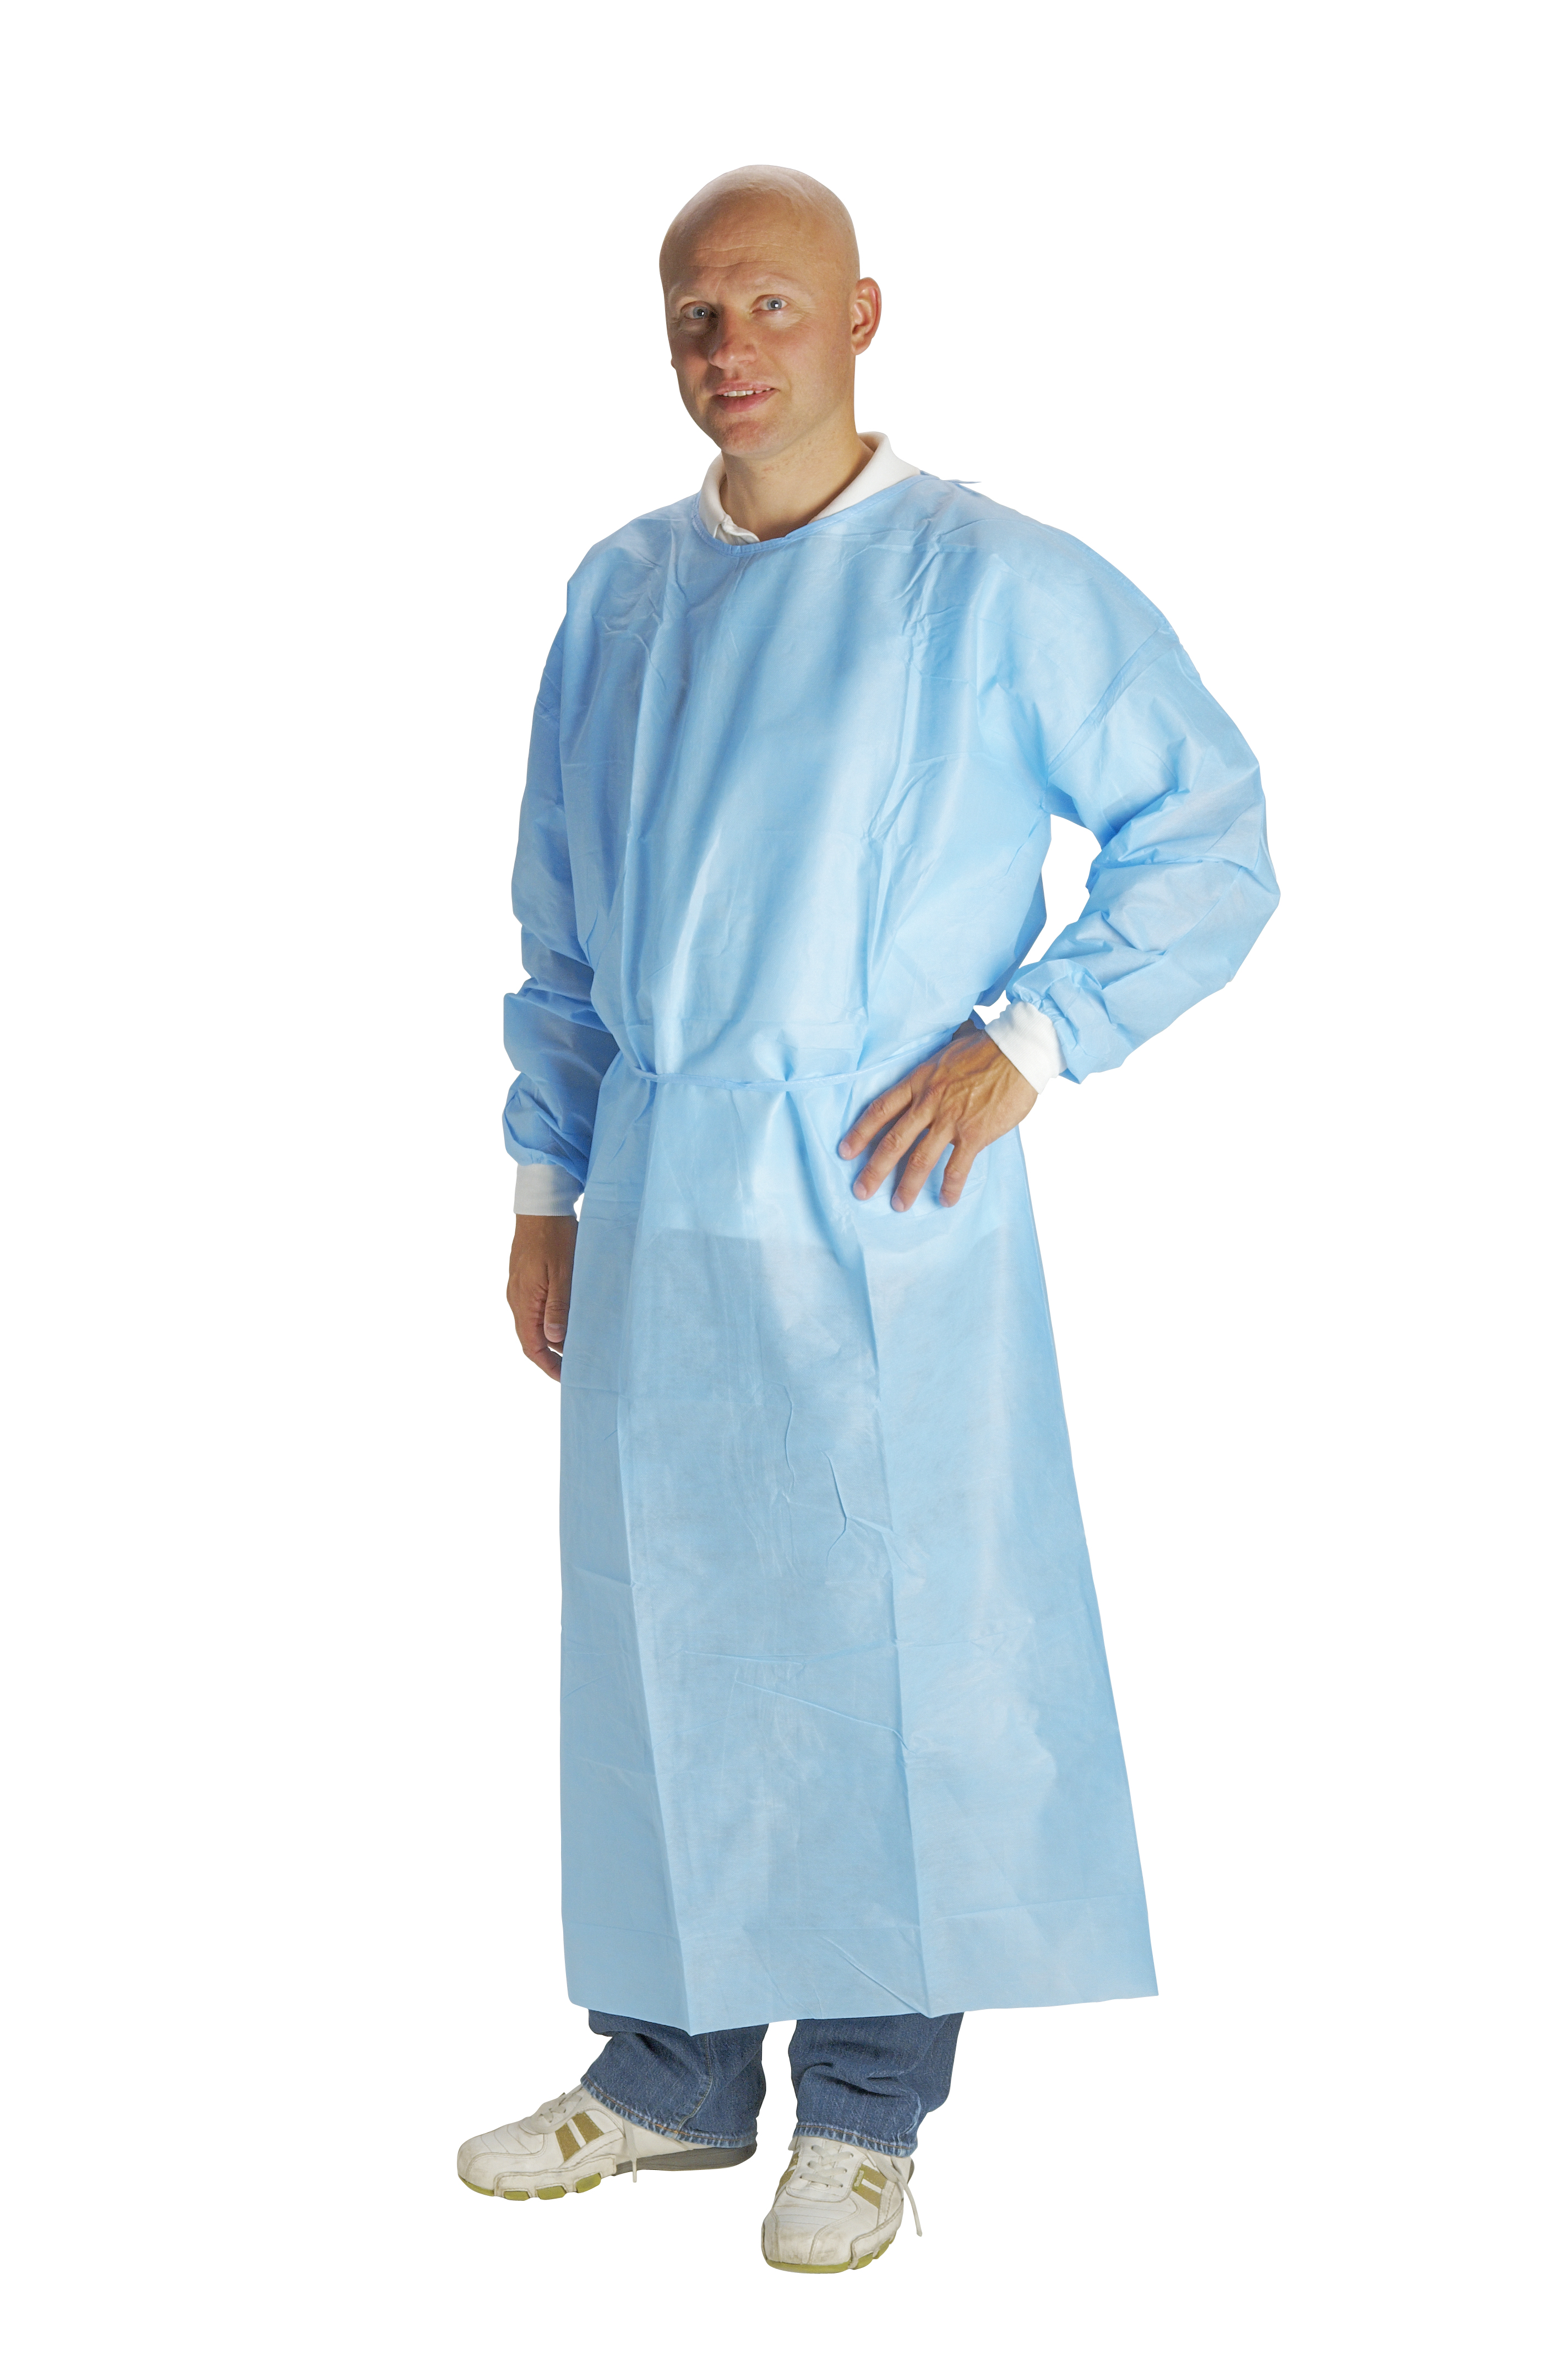 KRUTEX Basic Surgical Gown, sterile